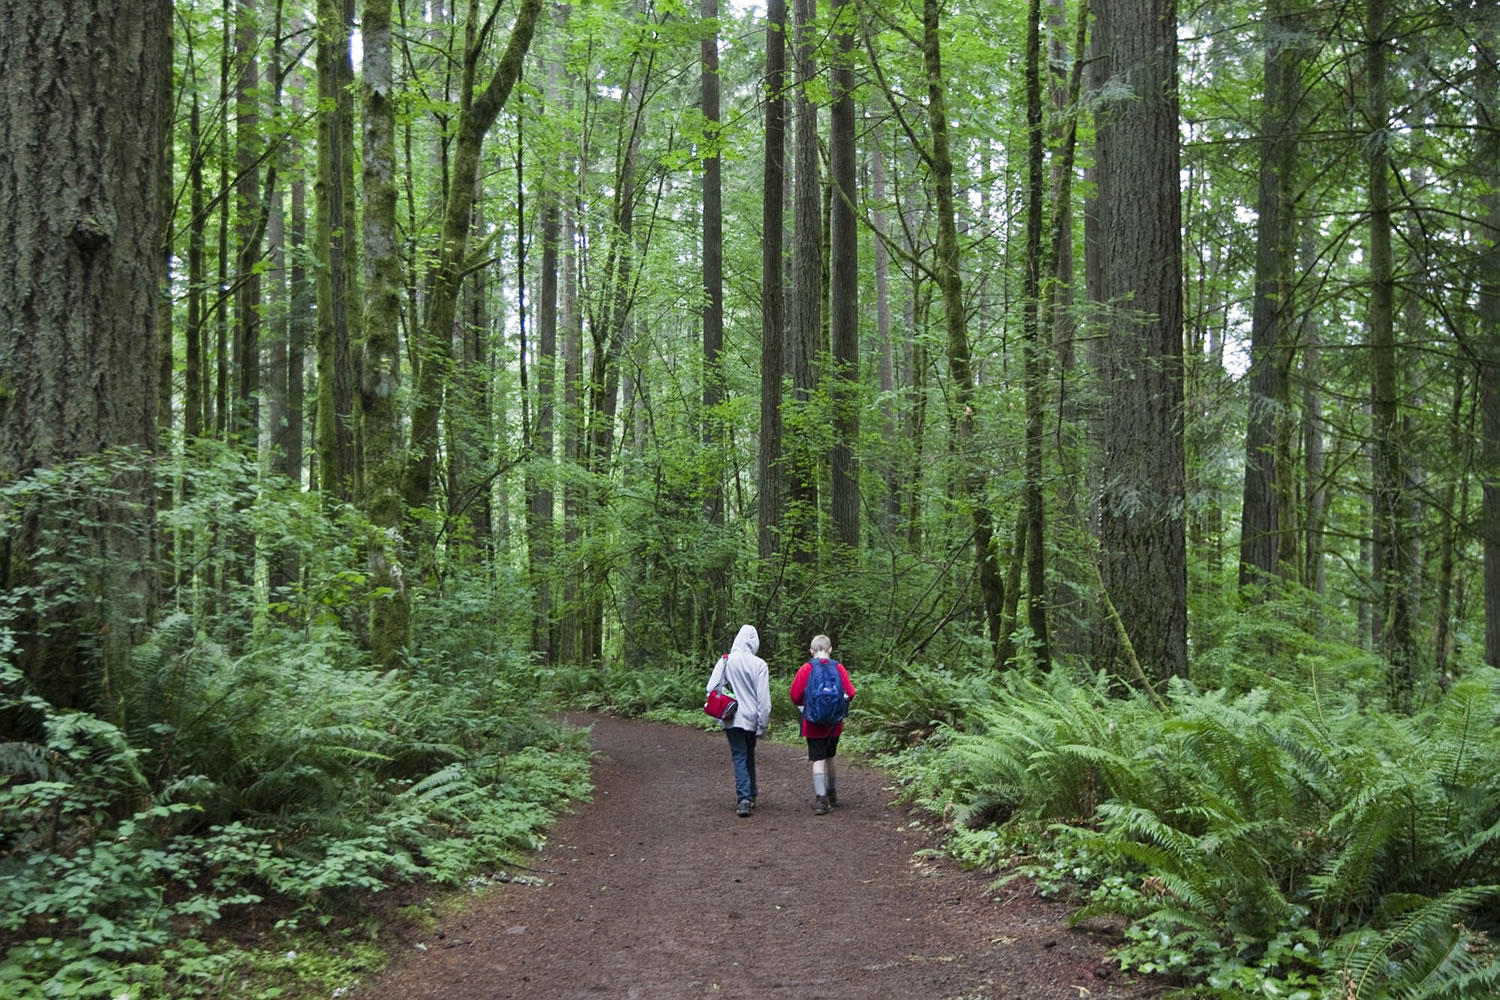 Lucas Carter, right, and Joel Weinmaster navigate through the forest as they participate in an event organized by the Columbia River Orienteering Club at Battle Ground Lake State Park in June.